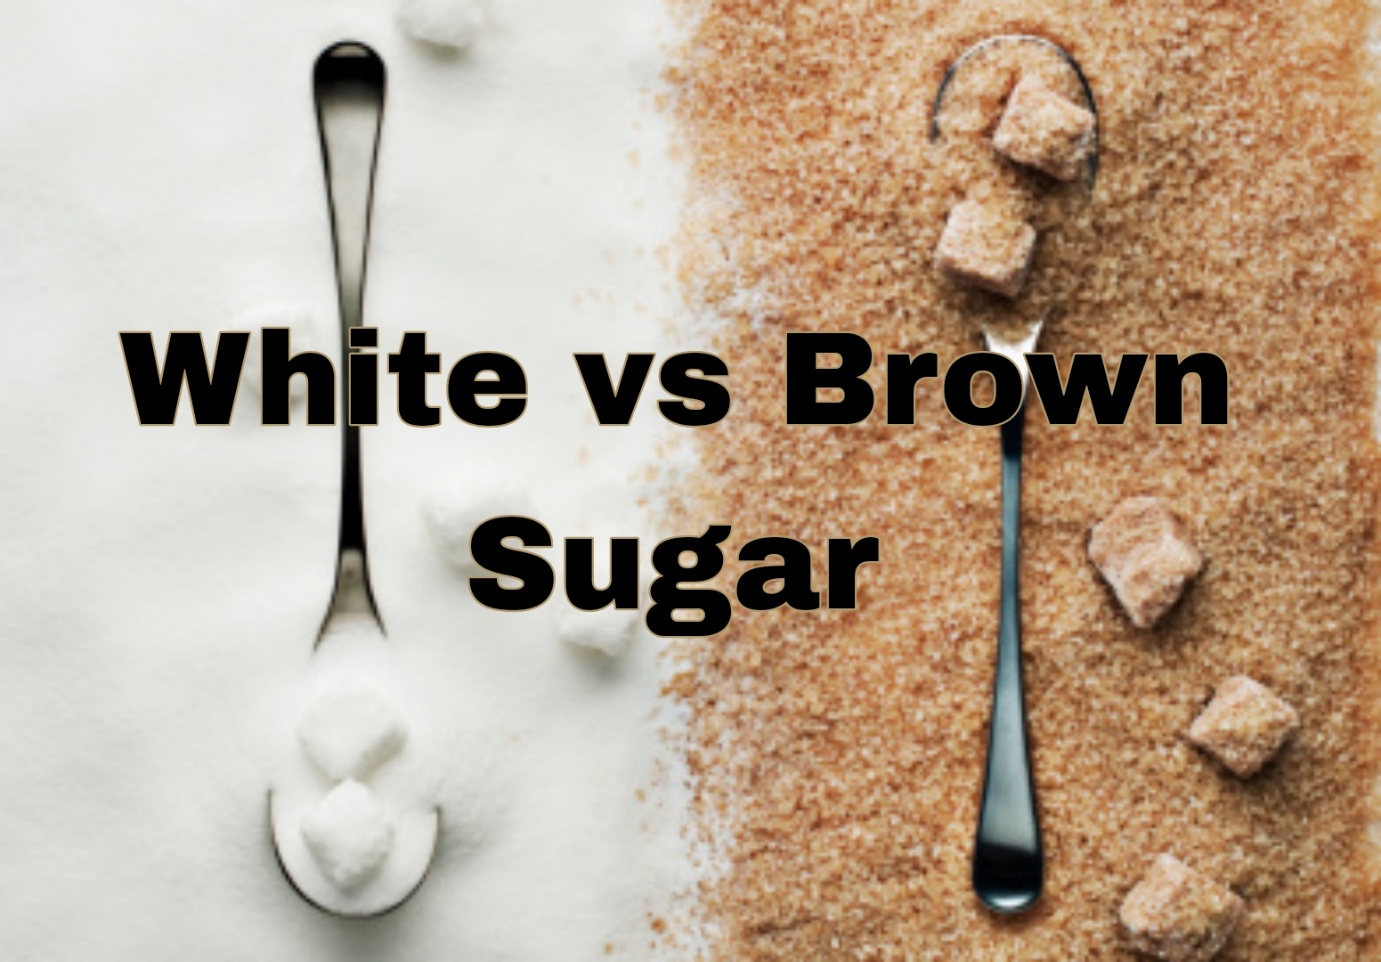 How many calories do 2 tbsp of brown sugar contain?